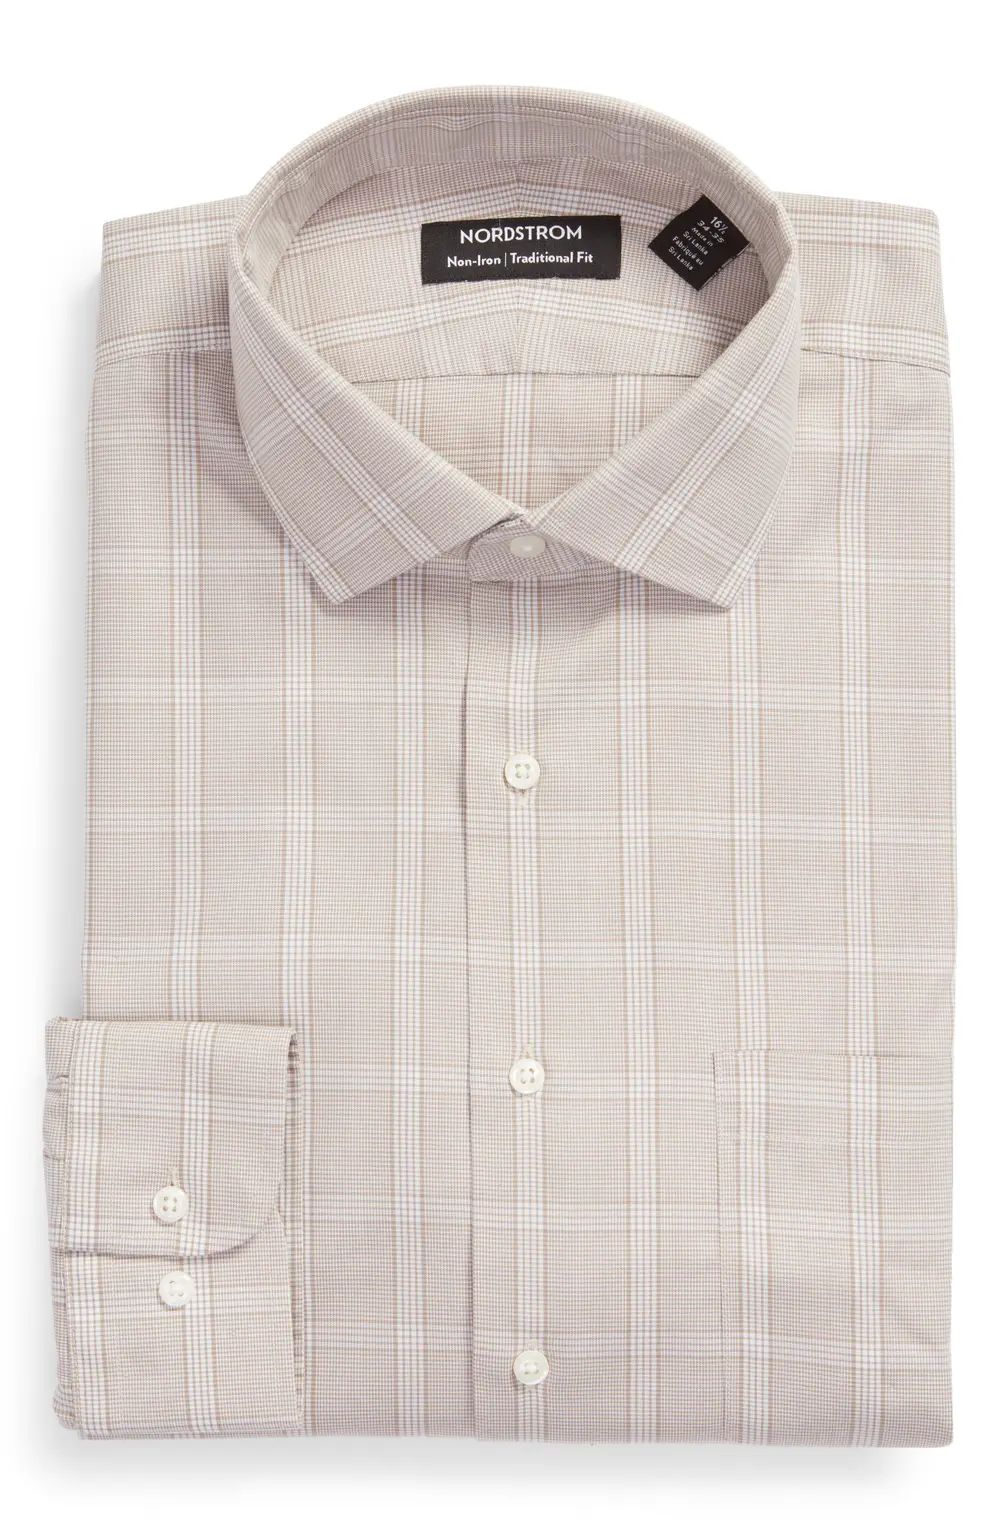 Nordstrom Tonal Check Dress Shirt, Size 18.5 - 36/37 Us in Tan Greige Tonal Grid at Nordstrom | Nordstrom Canada